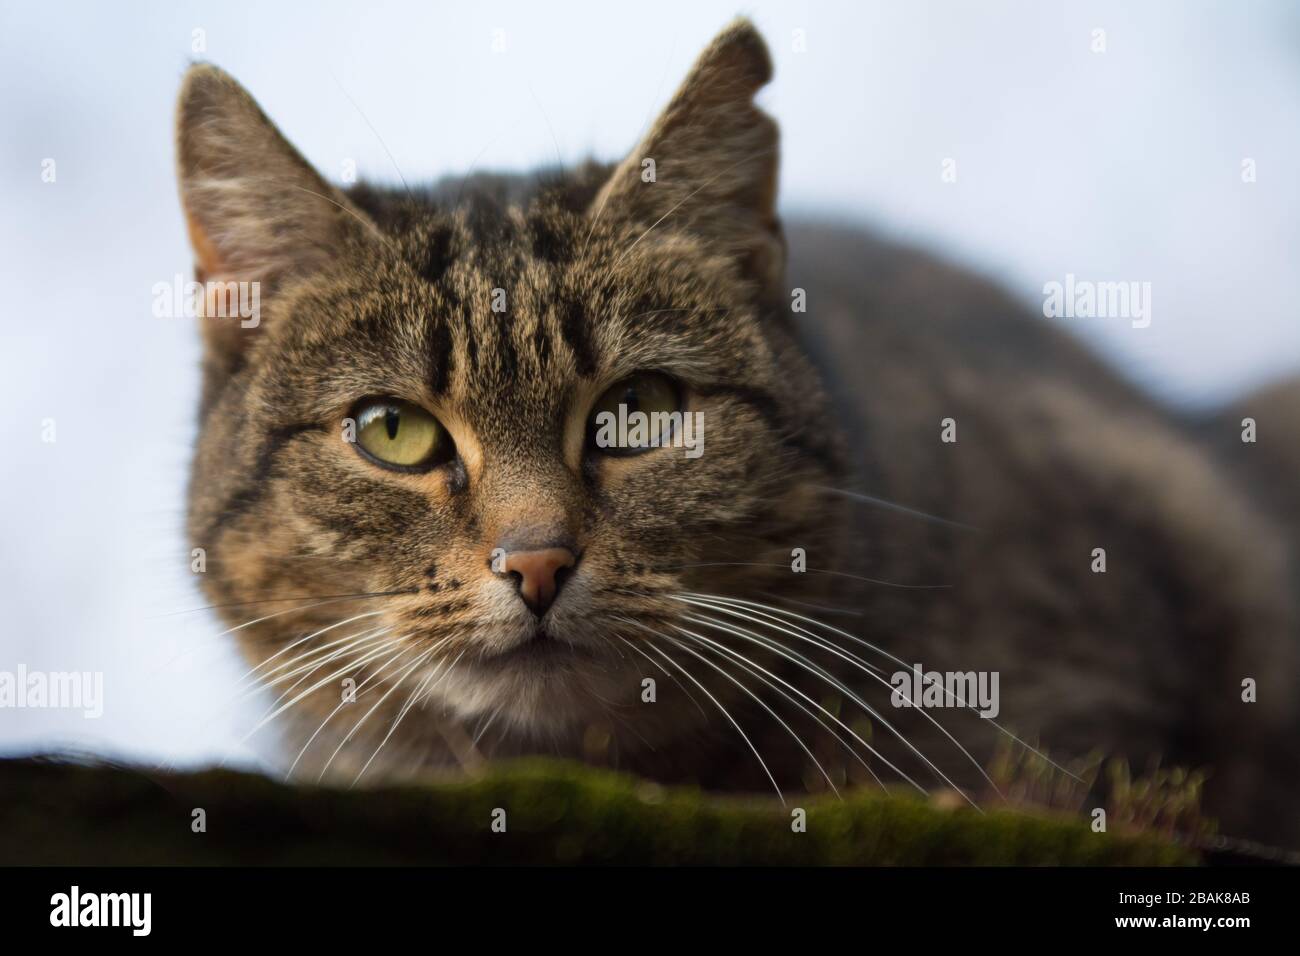 Close-up of a sprayed tabby cat with incision scar on her ear looking into the camera - copy space Stock Photo